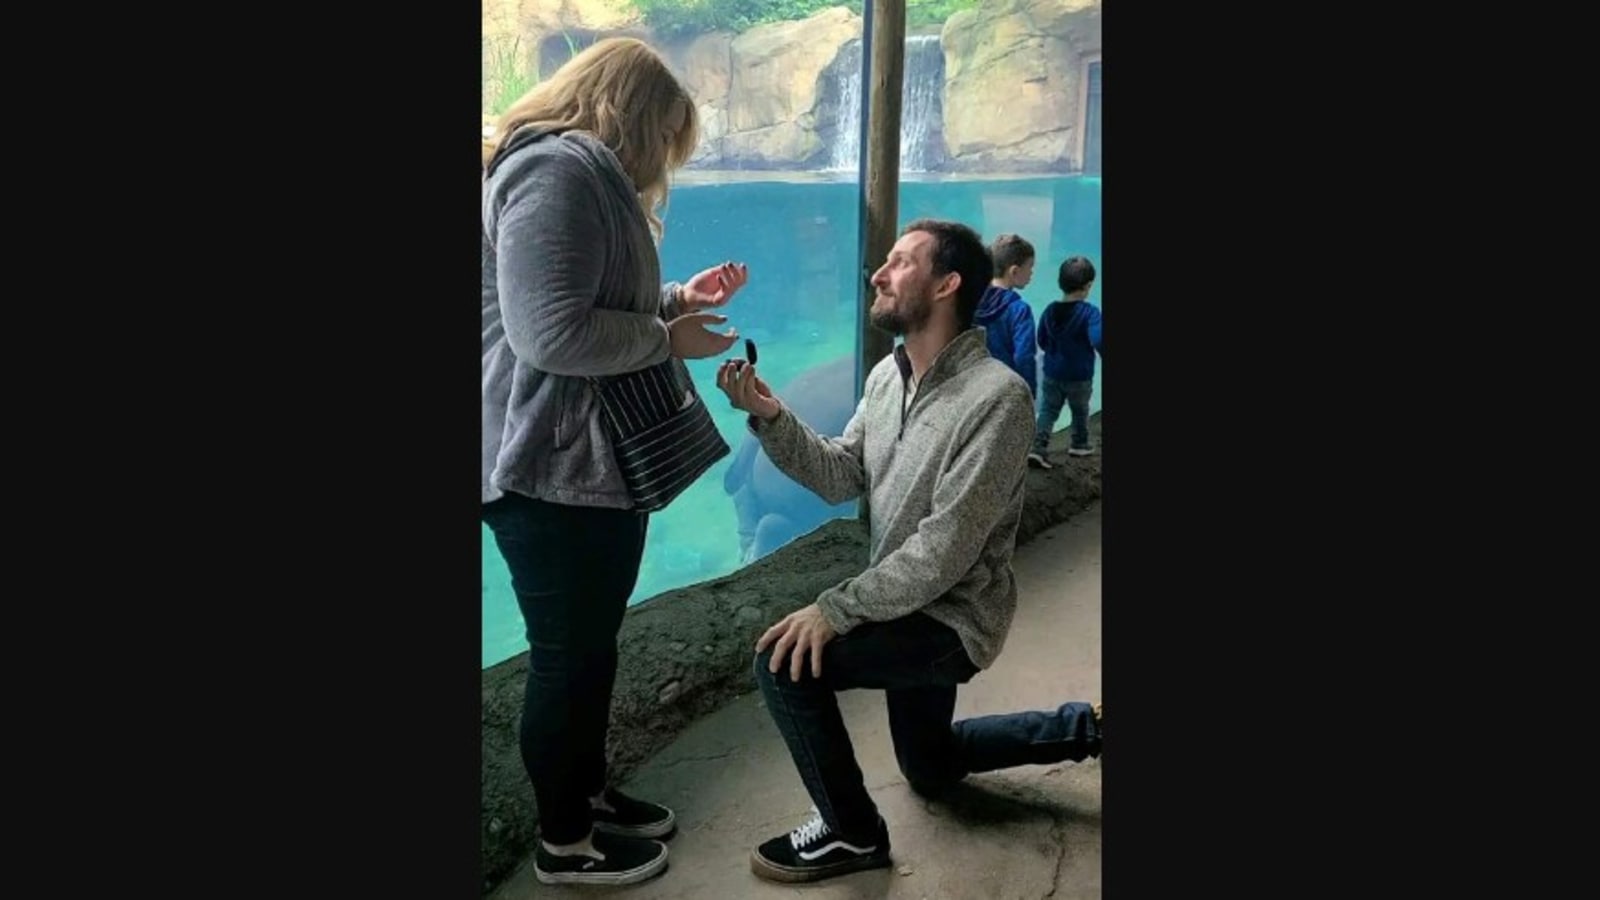 Man Proposes To Partner As Hippo Named Fiona Watches Pics Go Viral The Wall Fyi